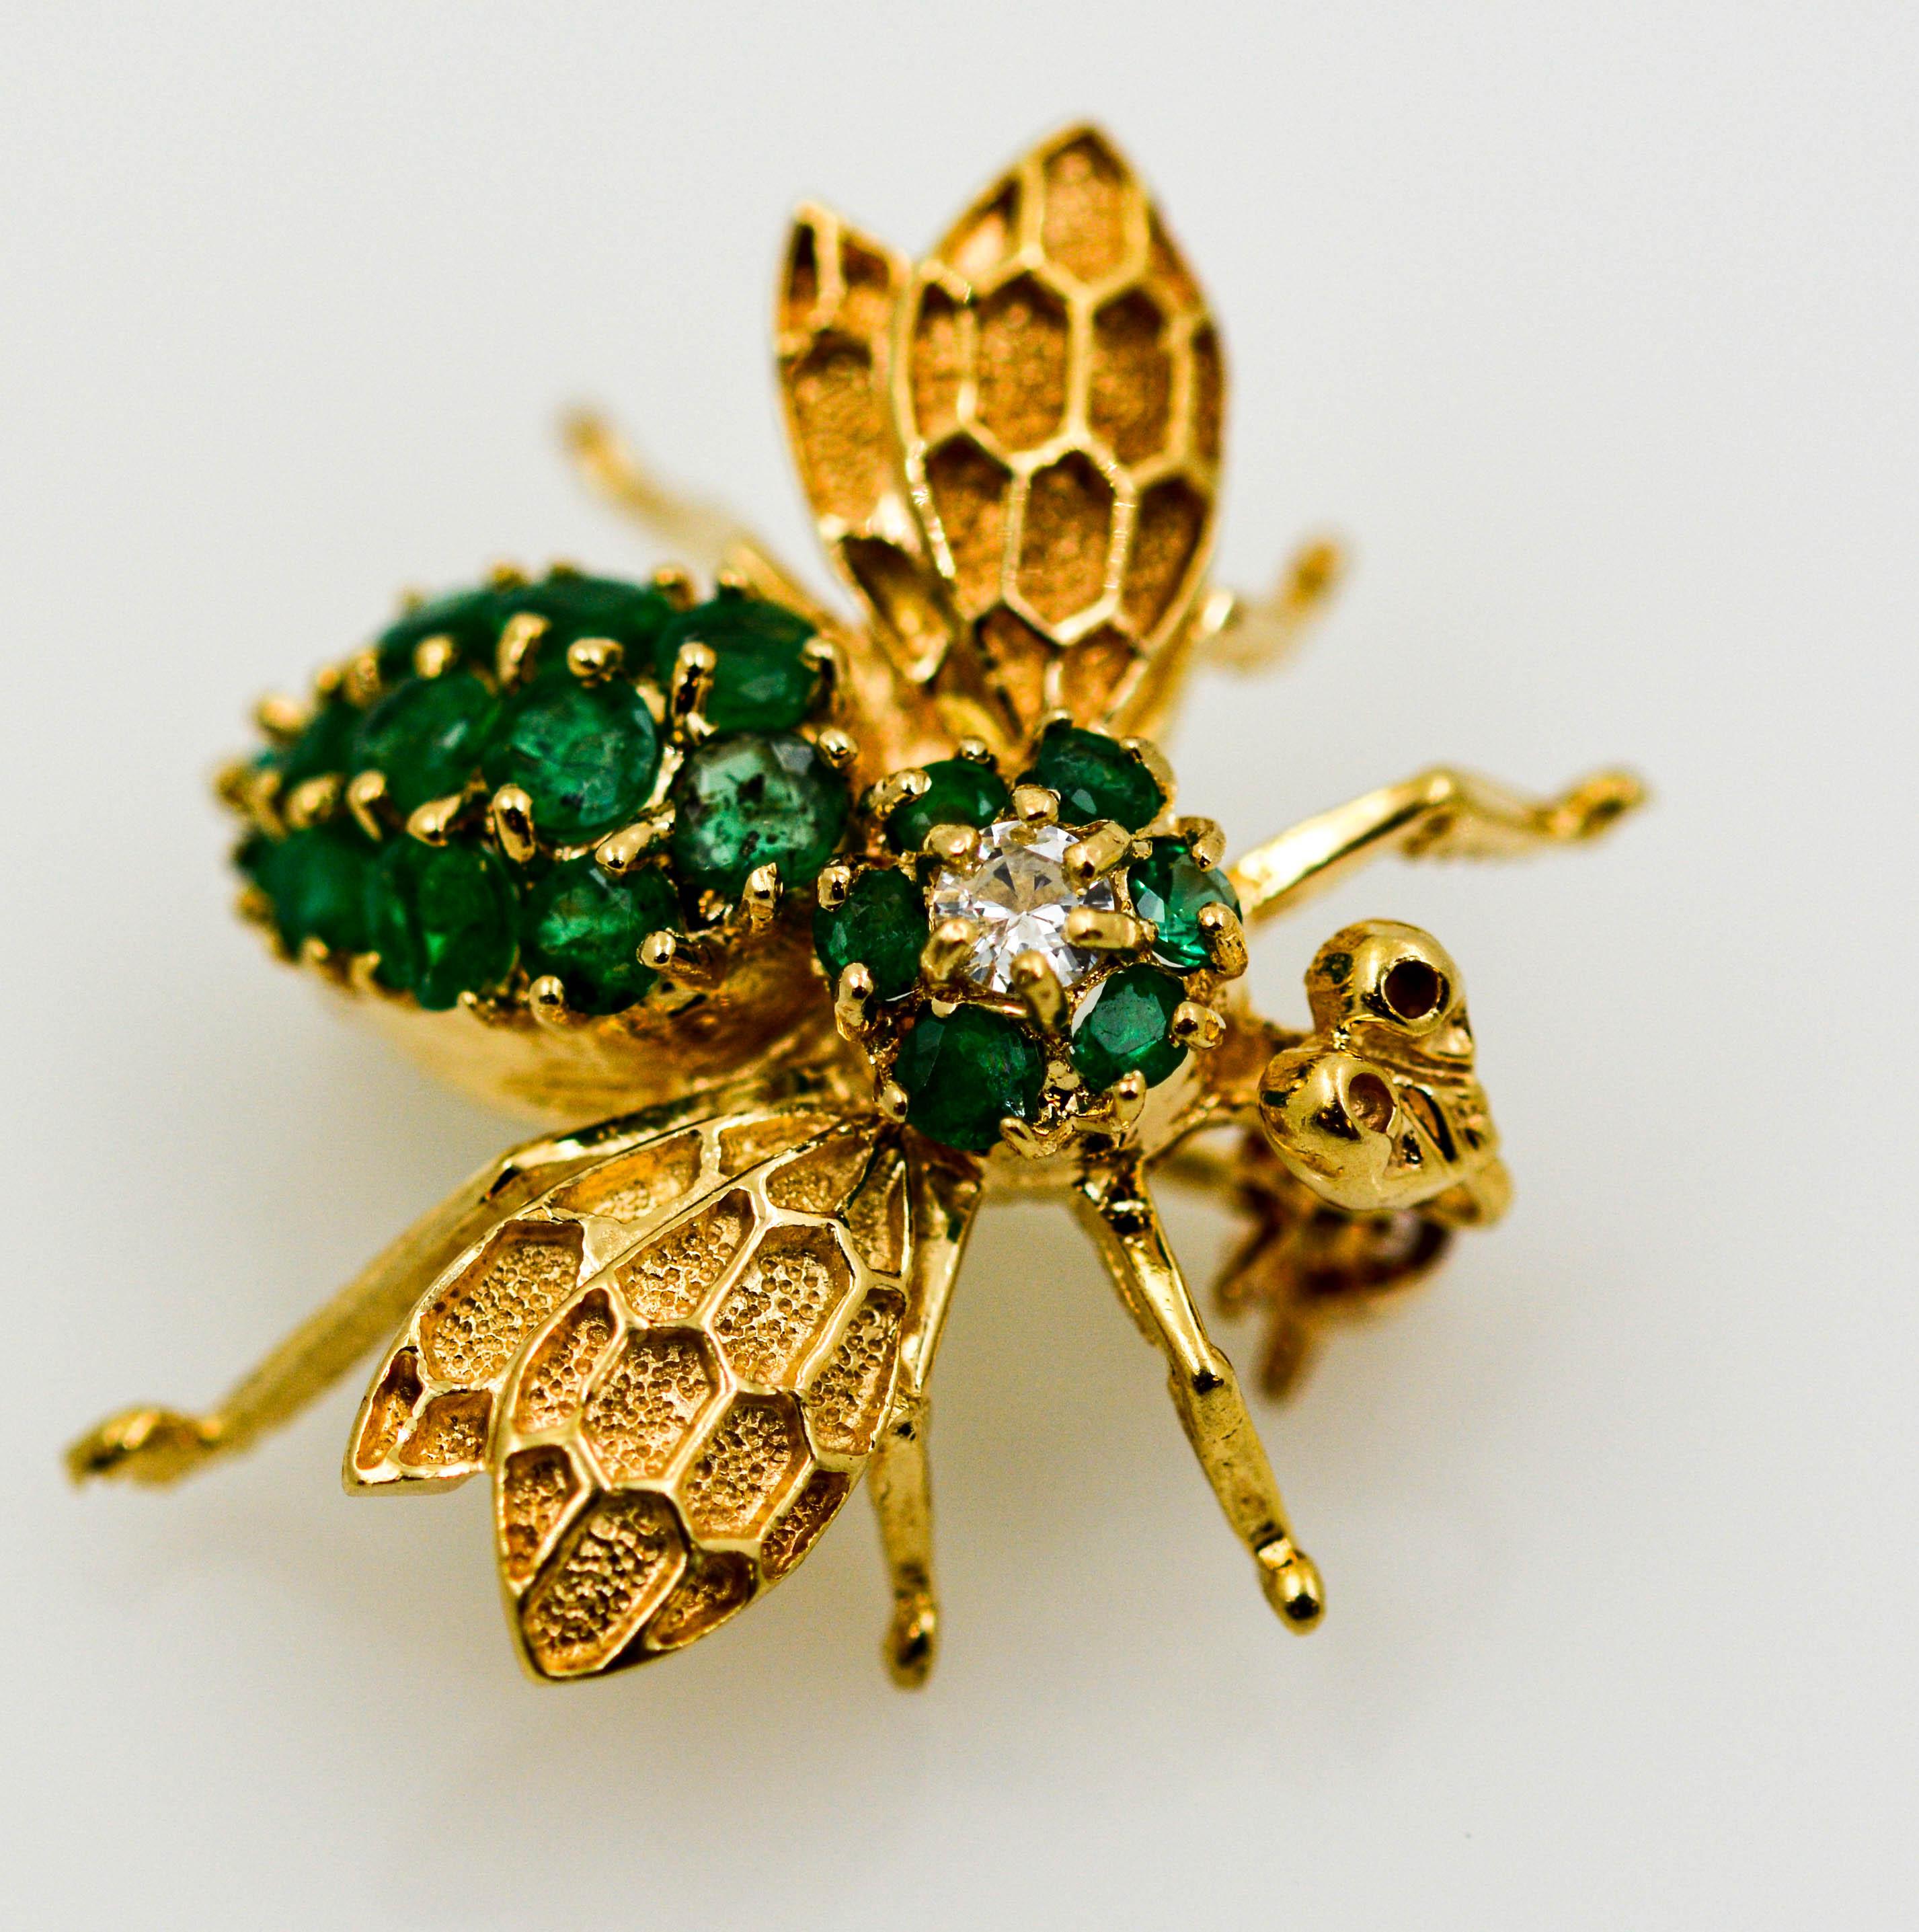 A 14kt yellow gold and emerald bee pin.  The body of this bee pin is set with 19 round emeralds that have an approximate combined weight of 0.50 carats.  The pin is also accented with a round brilliant cut diamond that weighs approximately 0.04